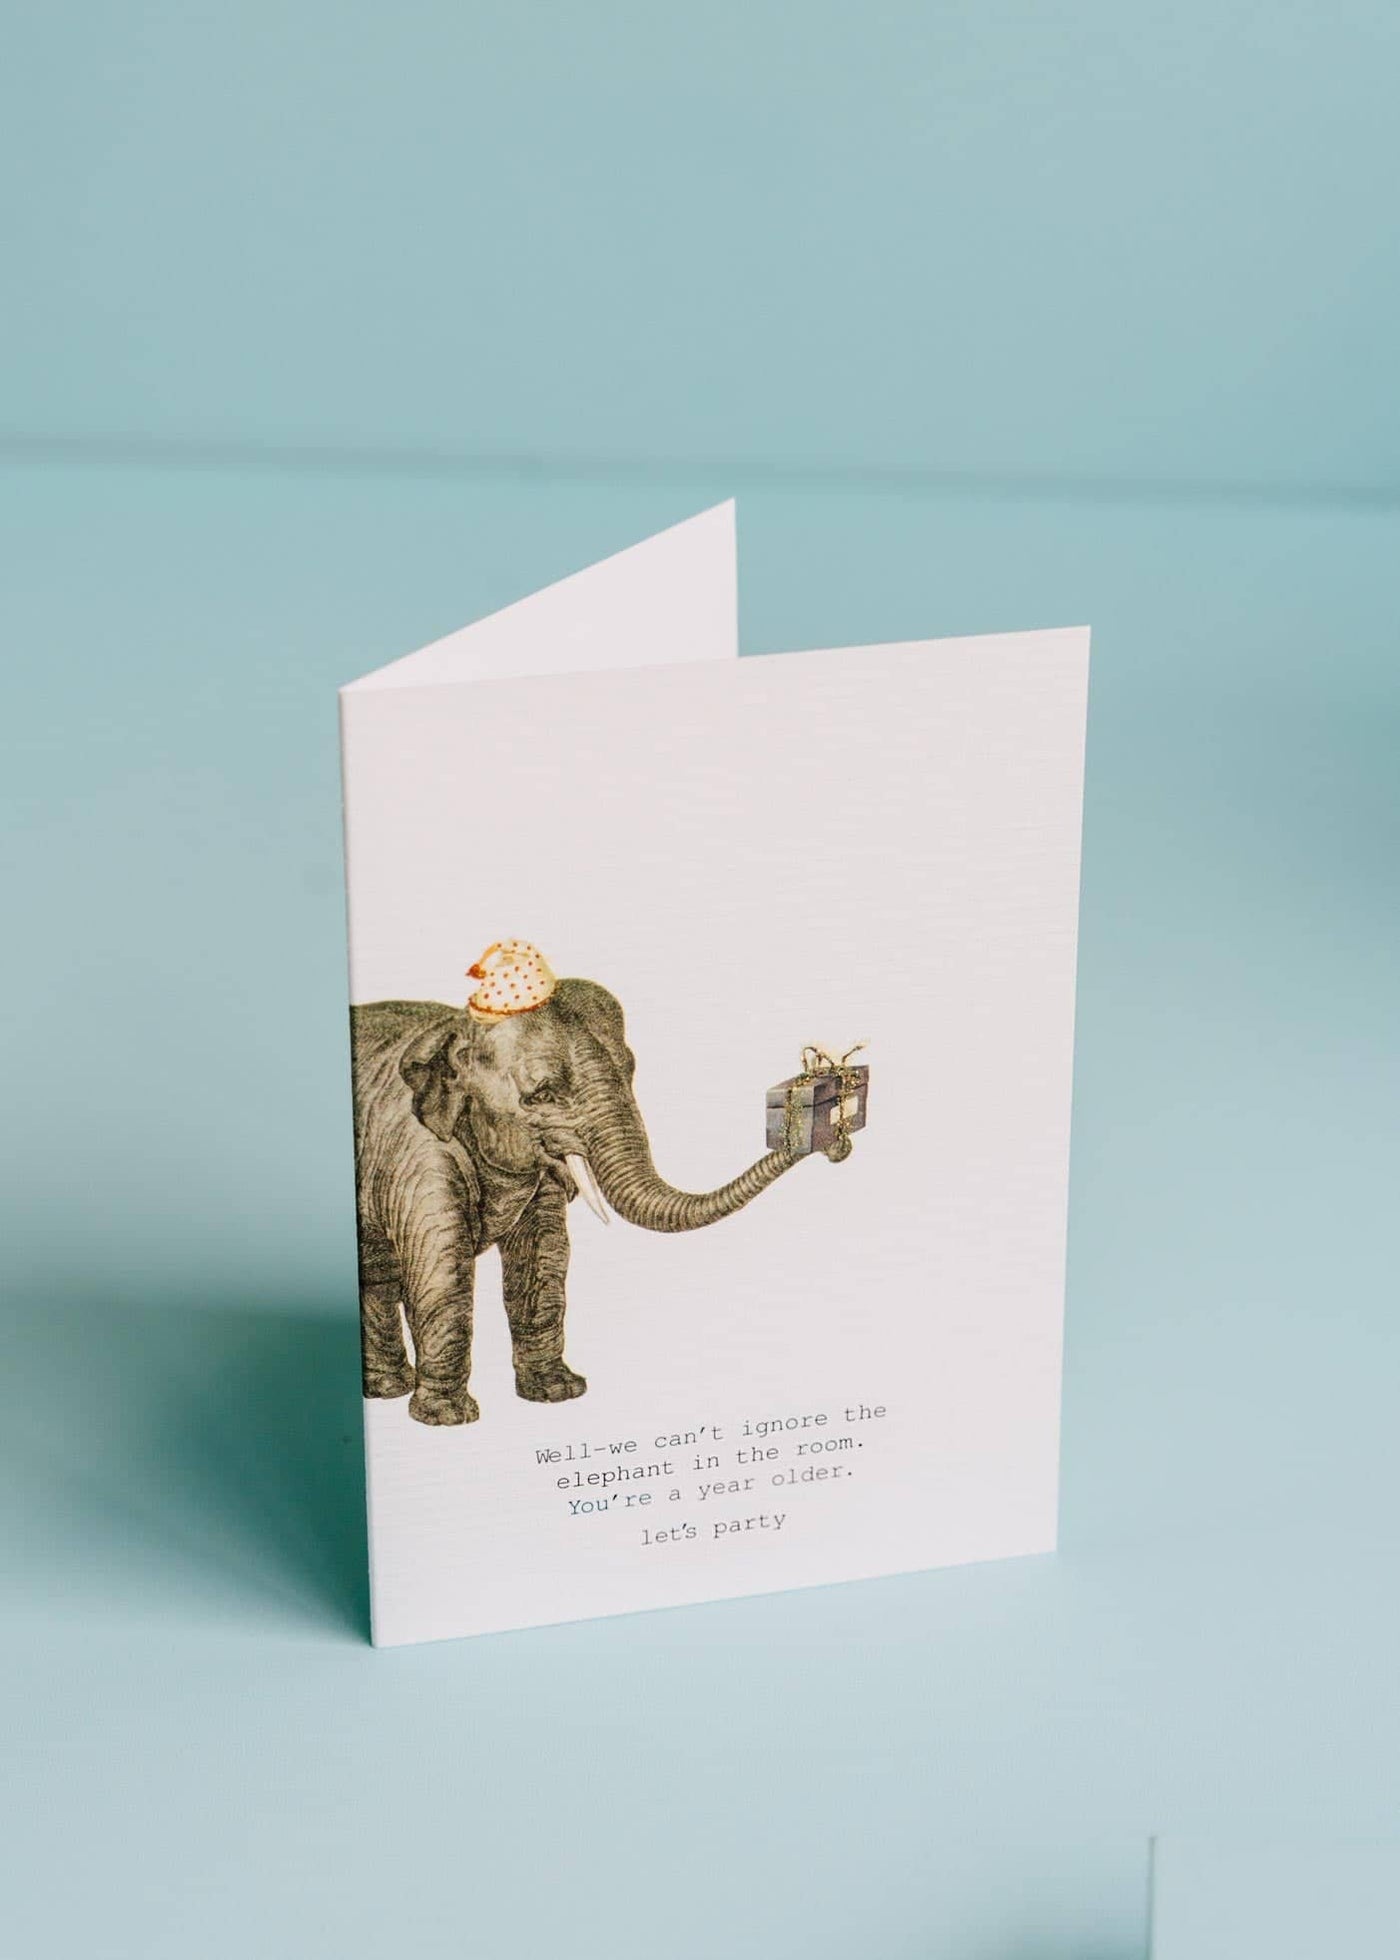 BIRTHDAY GREETING CARD "WE CAN'T IGNORE THE ELEPHANT"